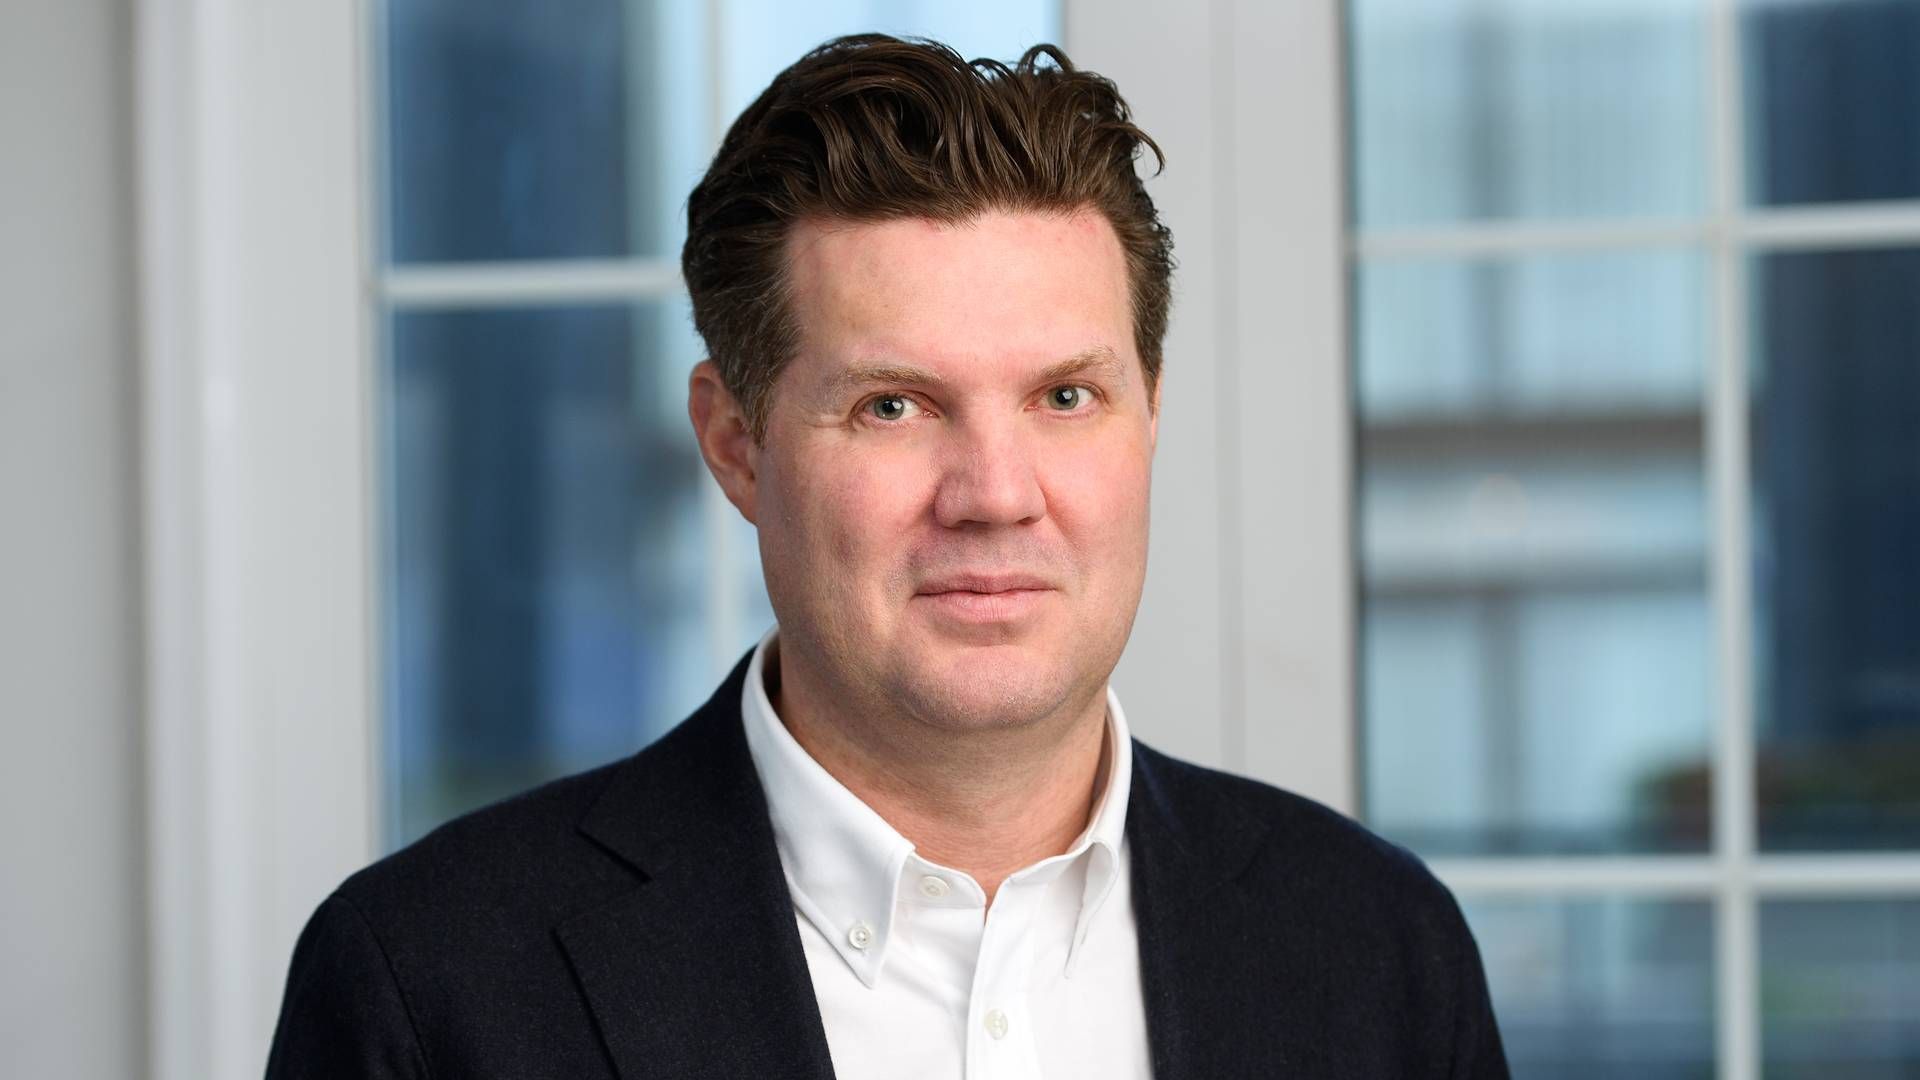 Daniel Lundin is new Investor Relations Director for Bain Capital in the Nordics. He will be based in Stockholm. | Photo: PR / Bain Capital